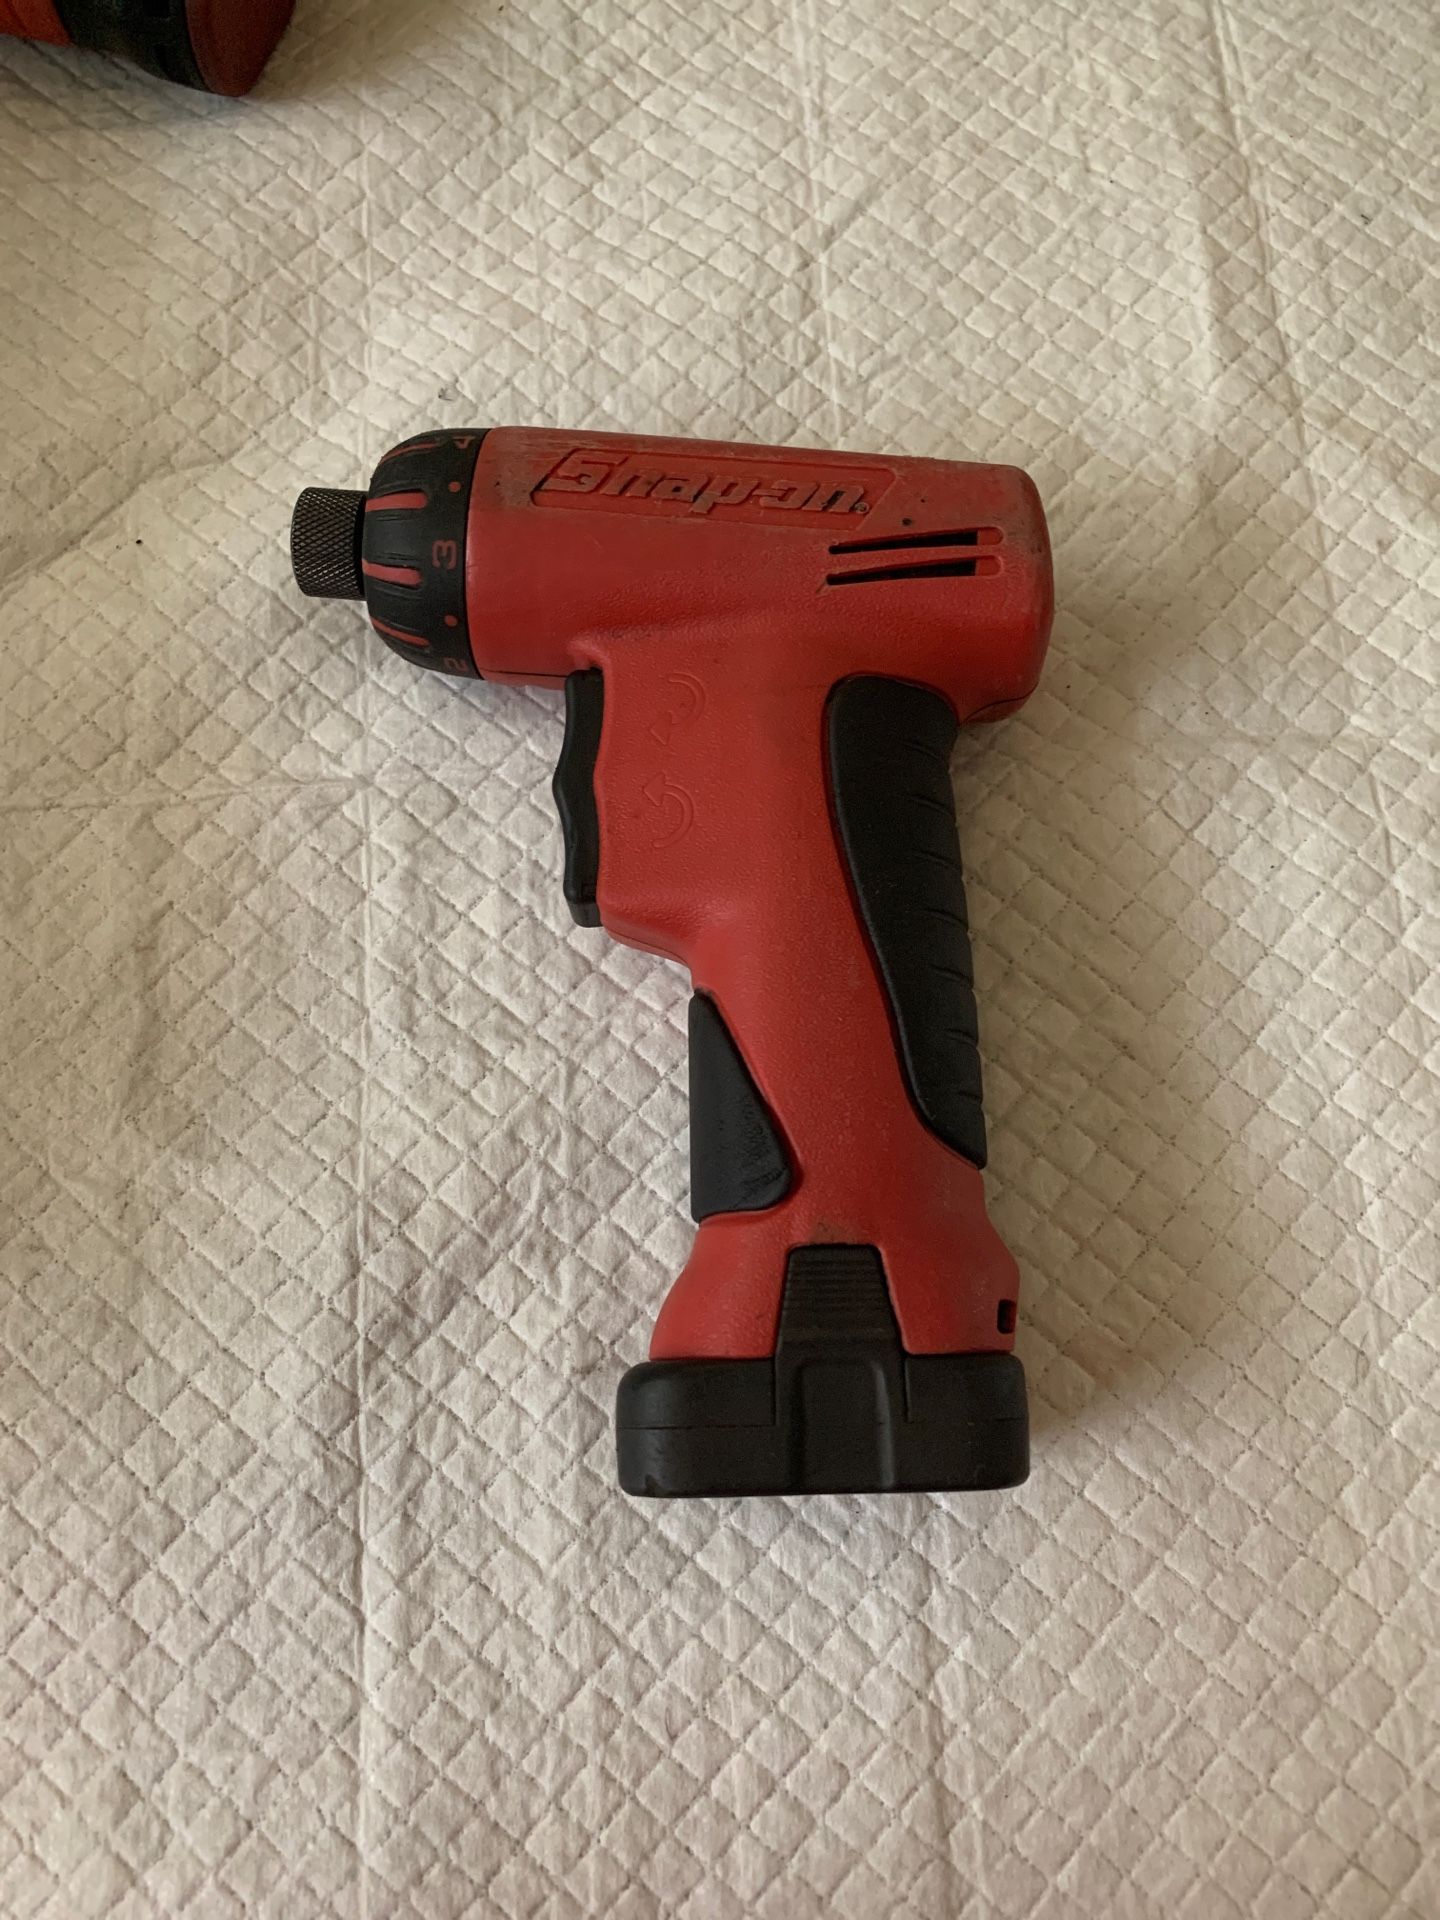 Snap on tools cordless screwdriver